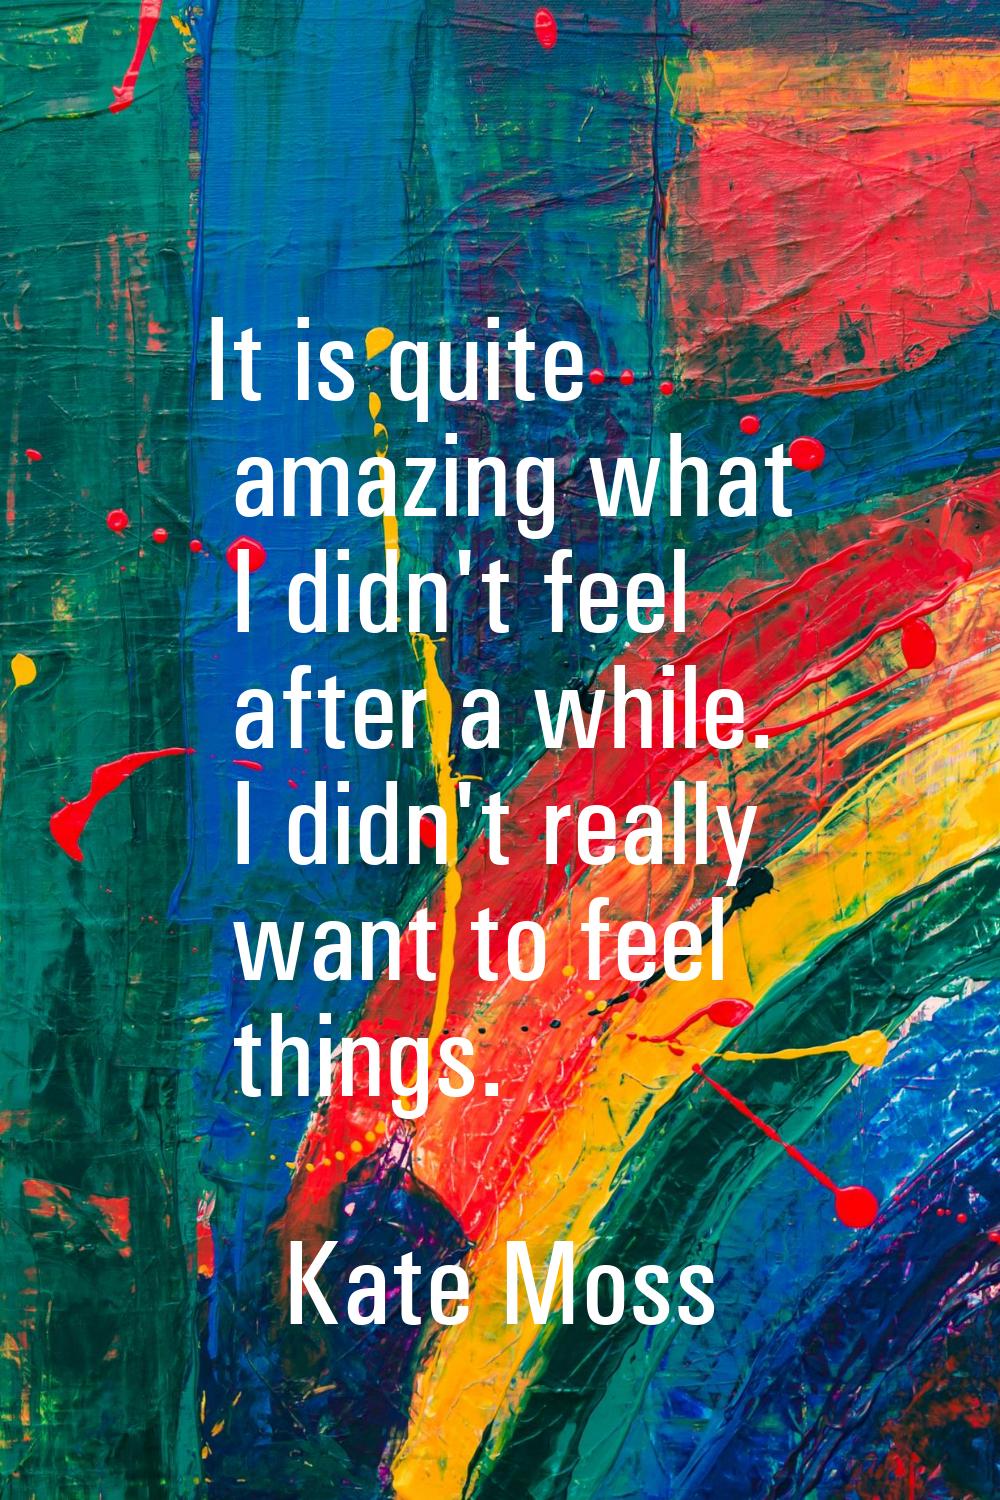 It is quite amazing what I didn't feel after a while. I didn't really want to feel things.